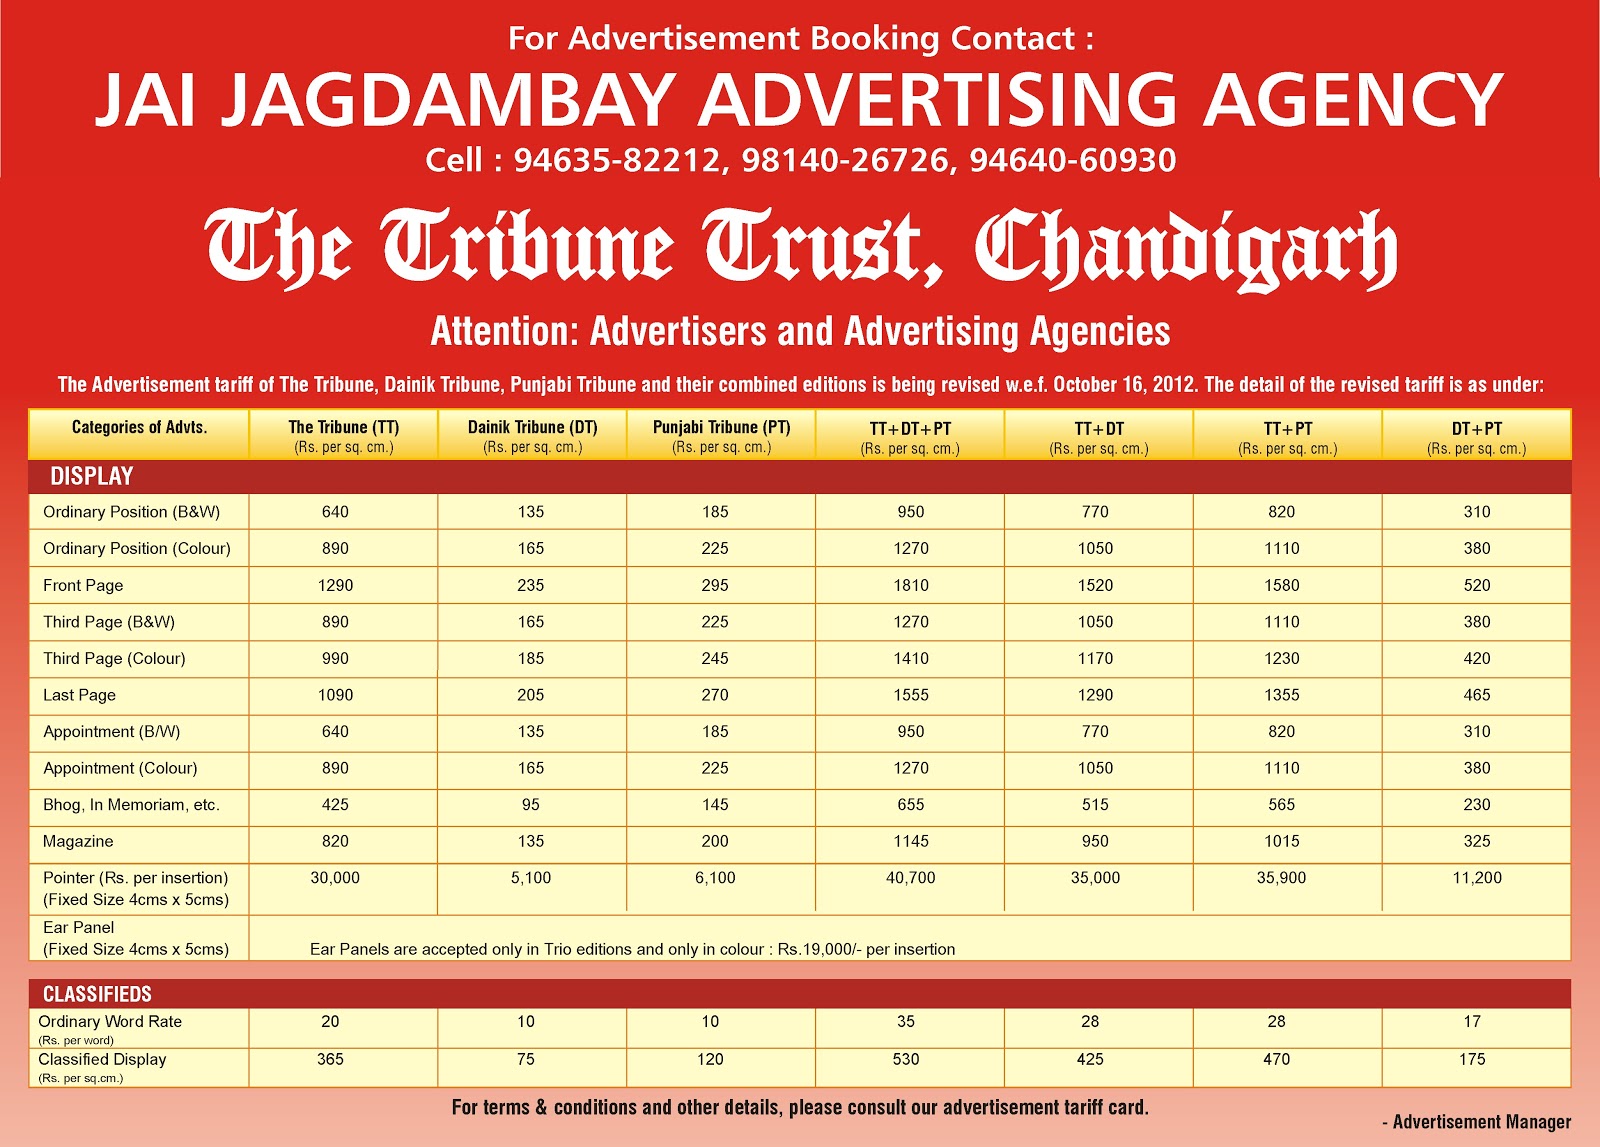 NEWSPAPER ADVERTISING AGENCY: THE TRIBUNE RATE CARD